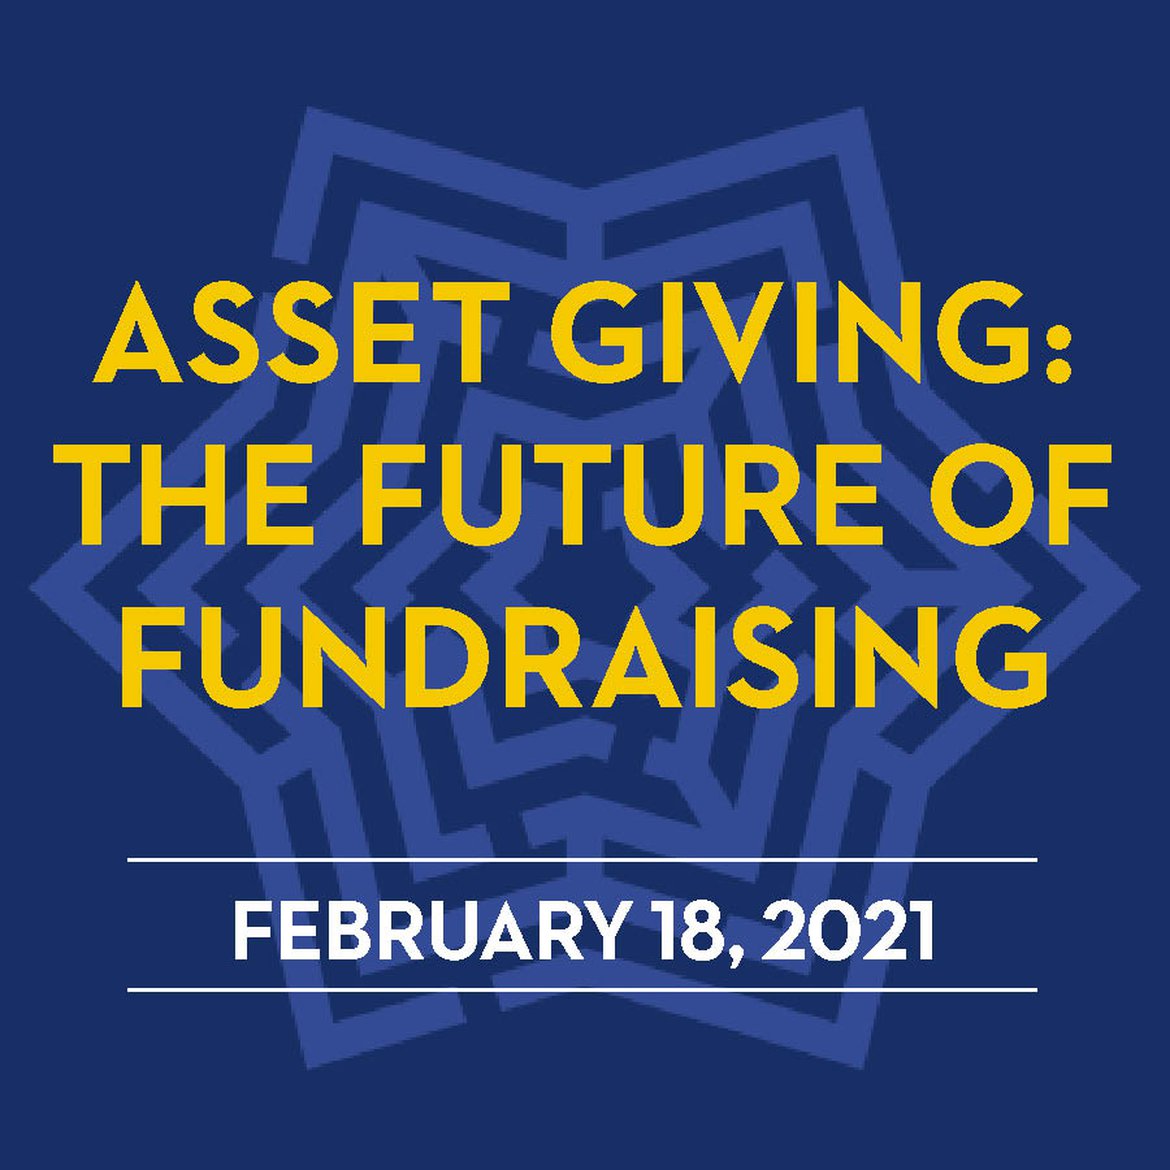 Asset Giving: The Future of Fundraising